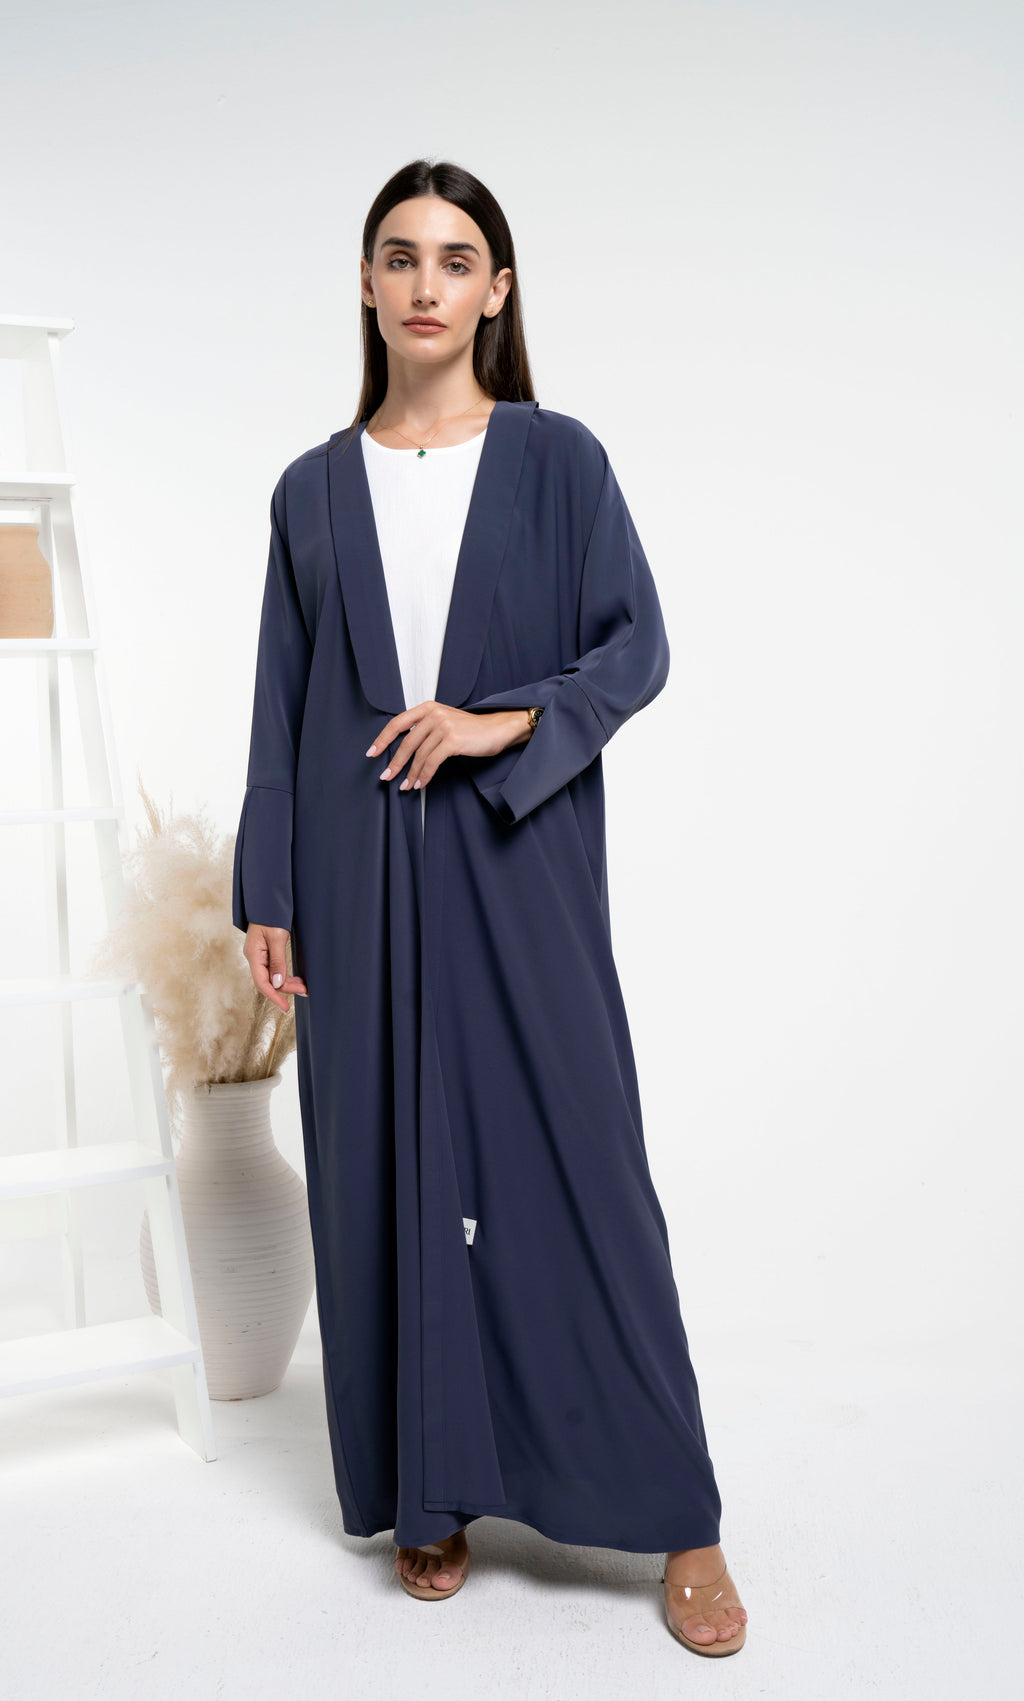 Bisht abaya with collar and cross pattern sleeves for sale.